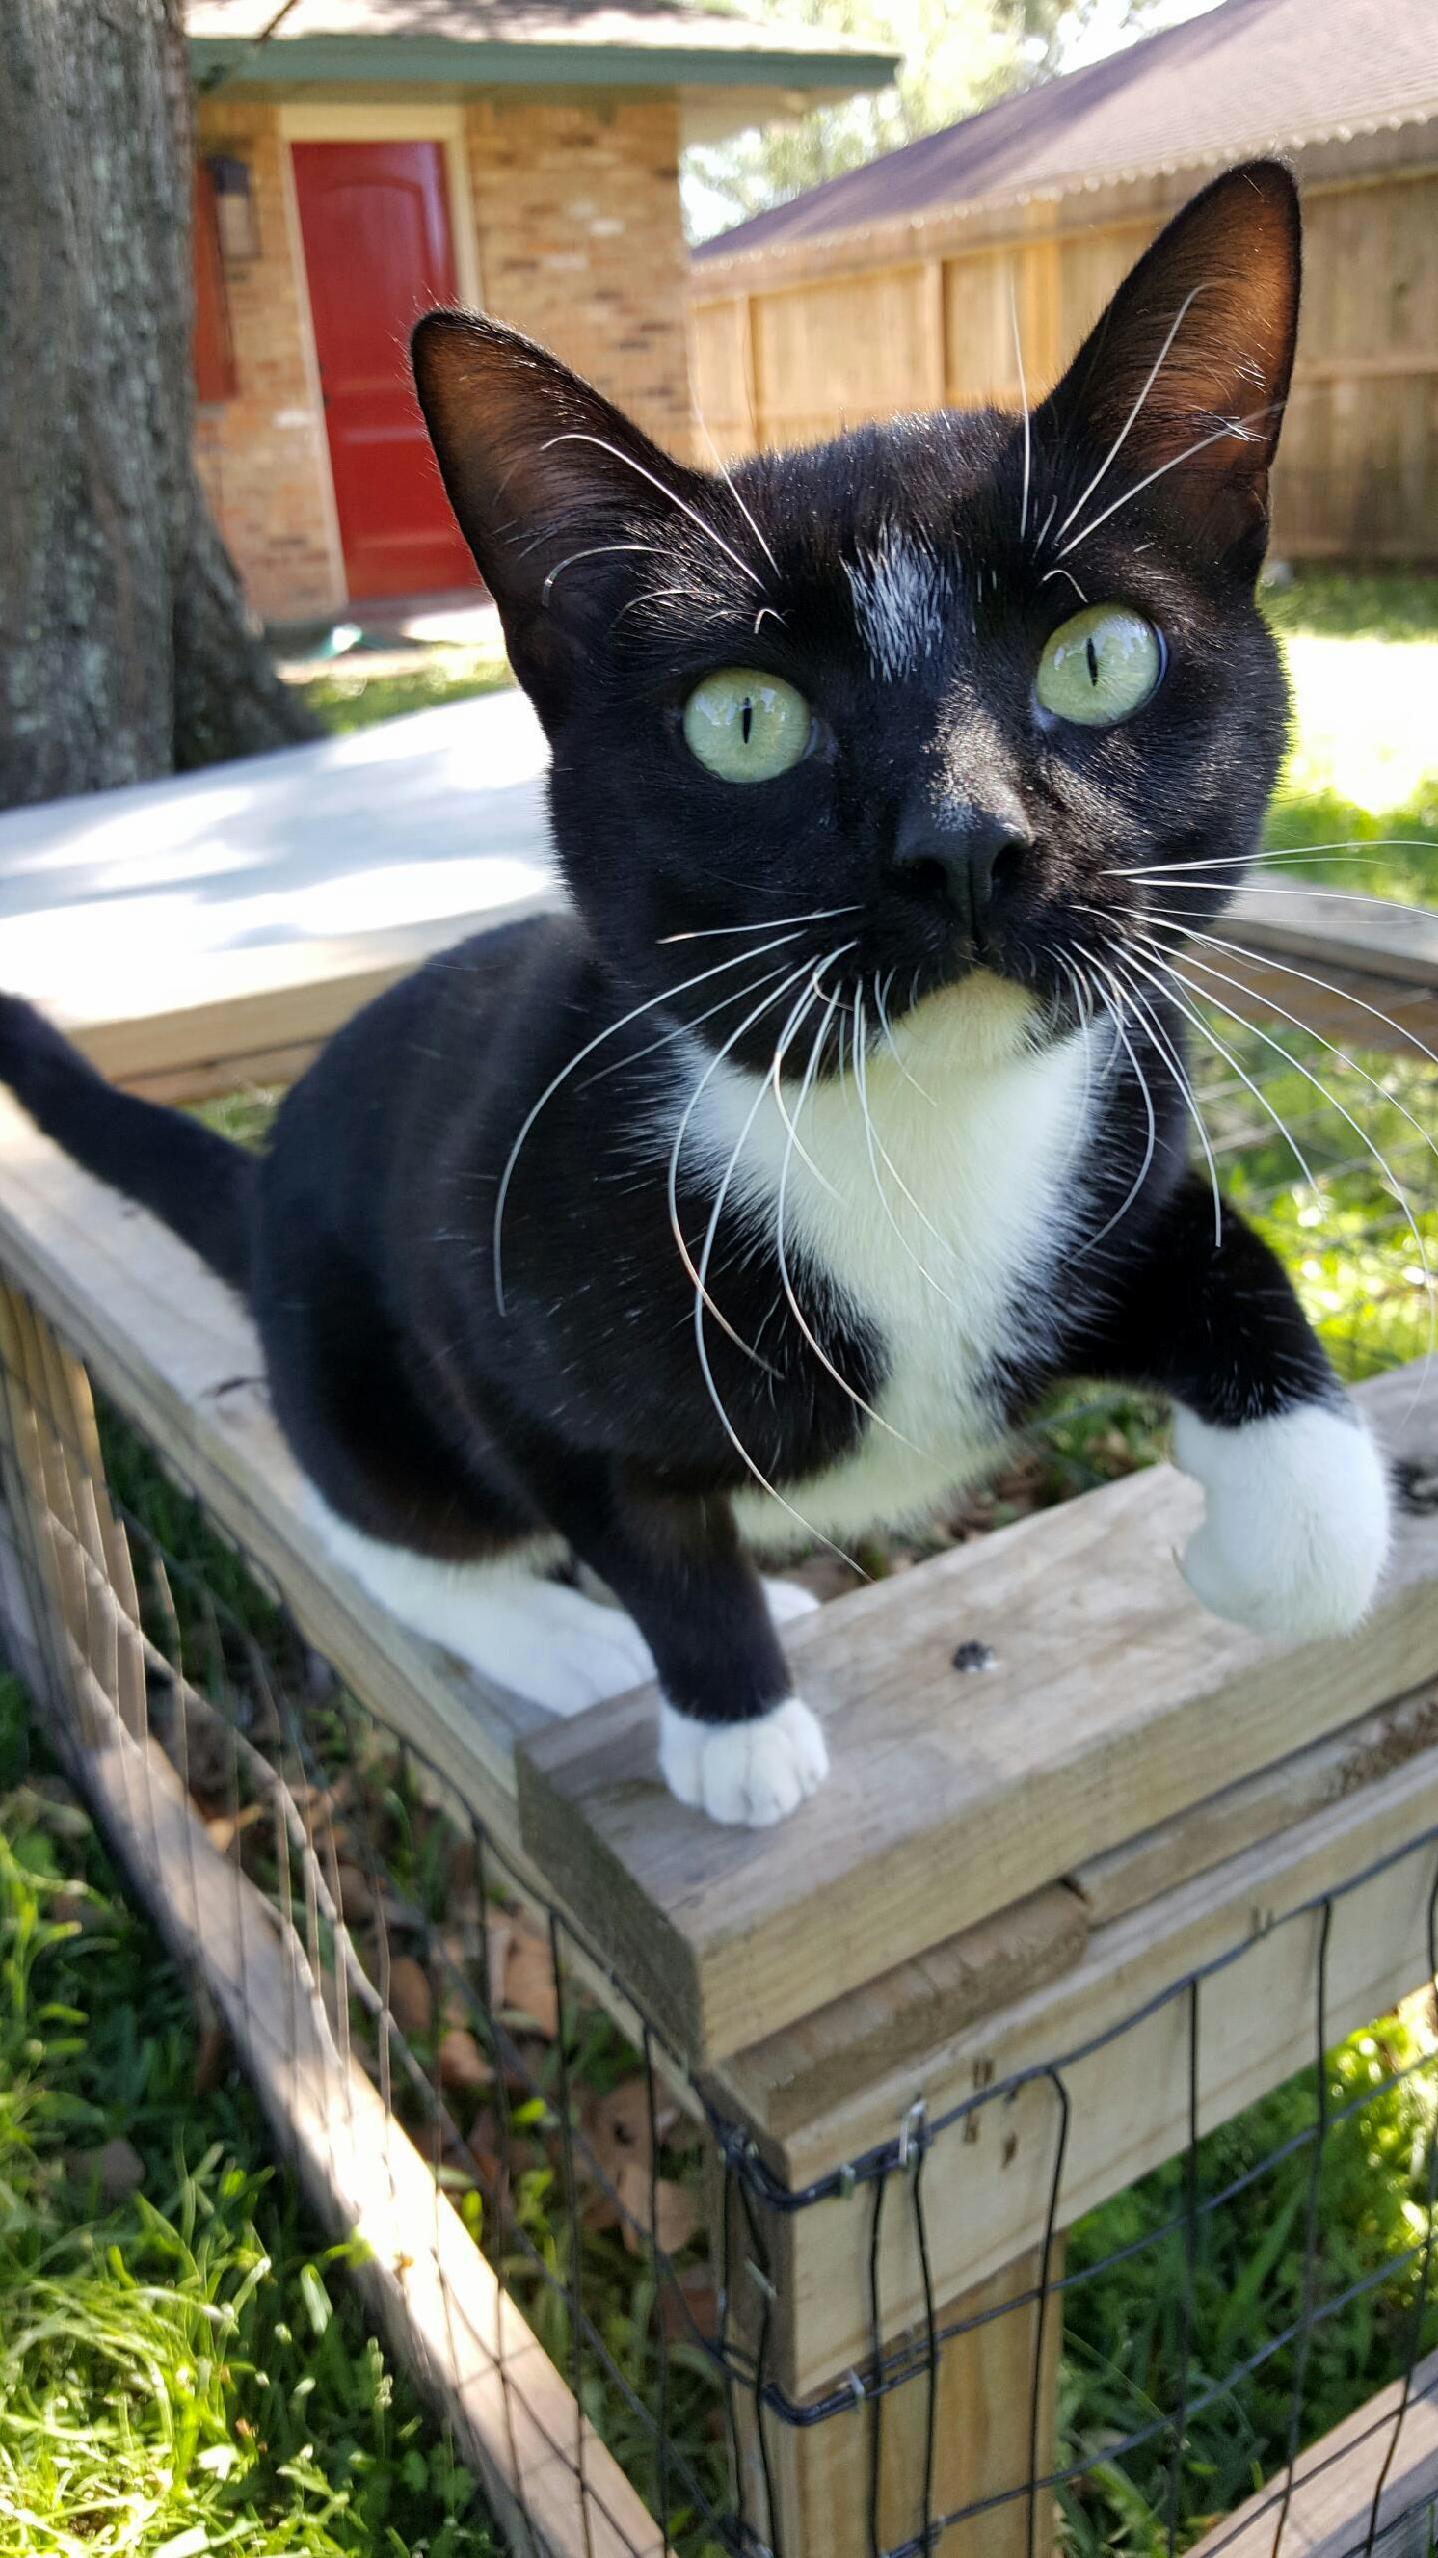 My aunt found this gorgeous kitty hanging out in her backyard his whiskers are too cute